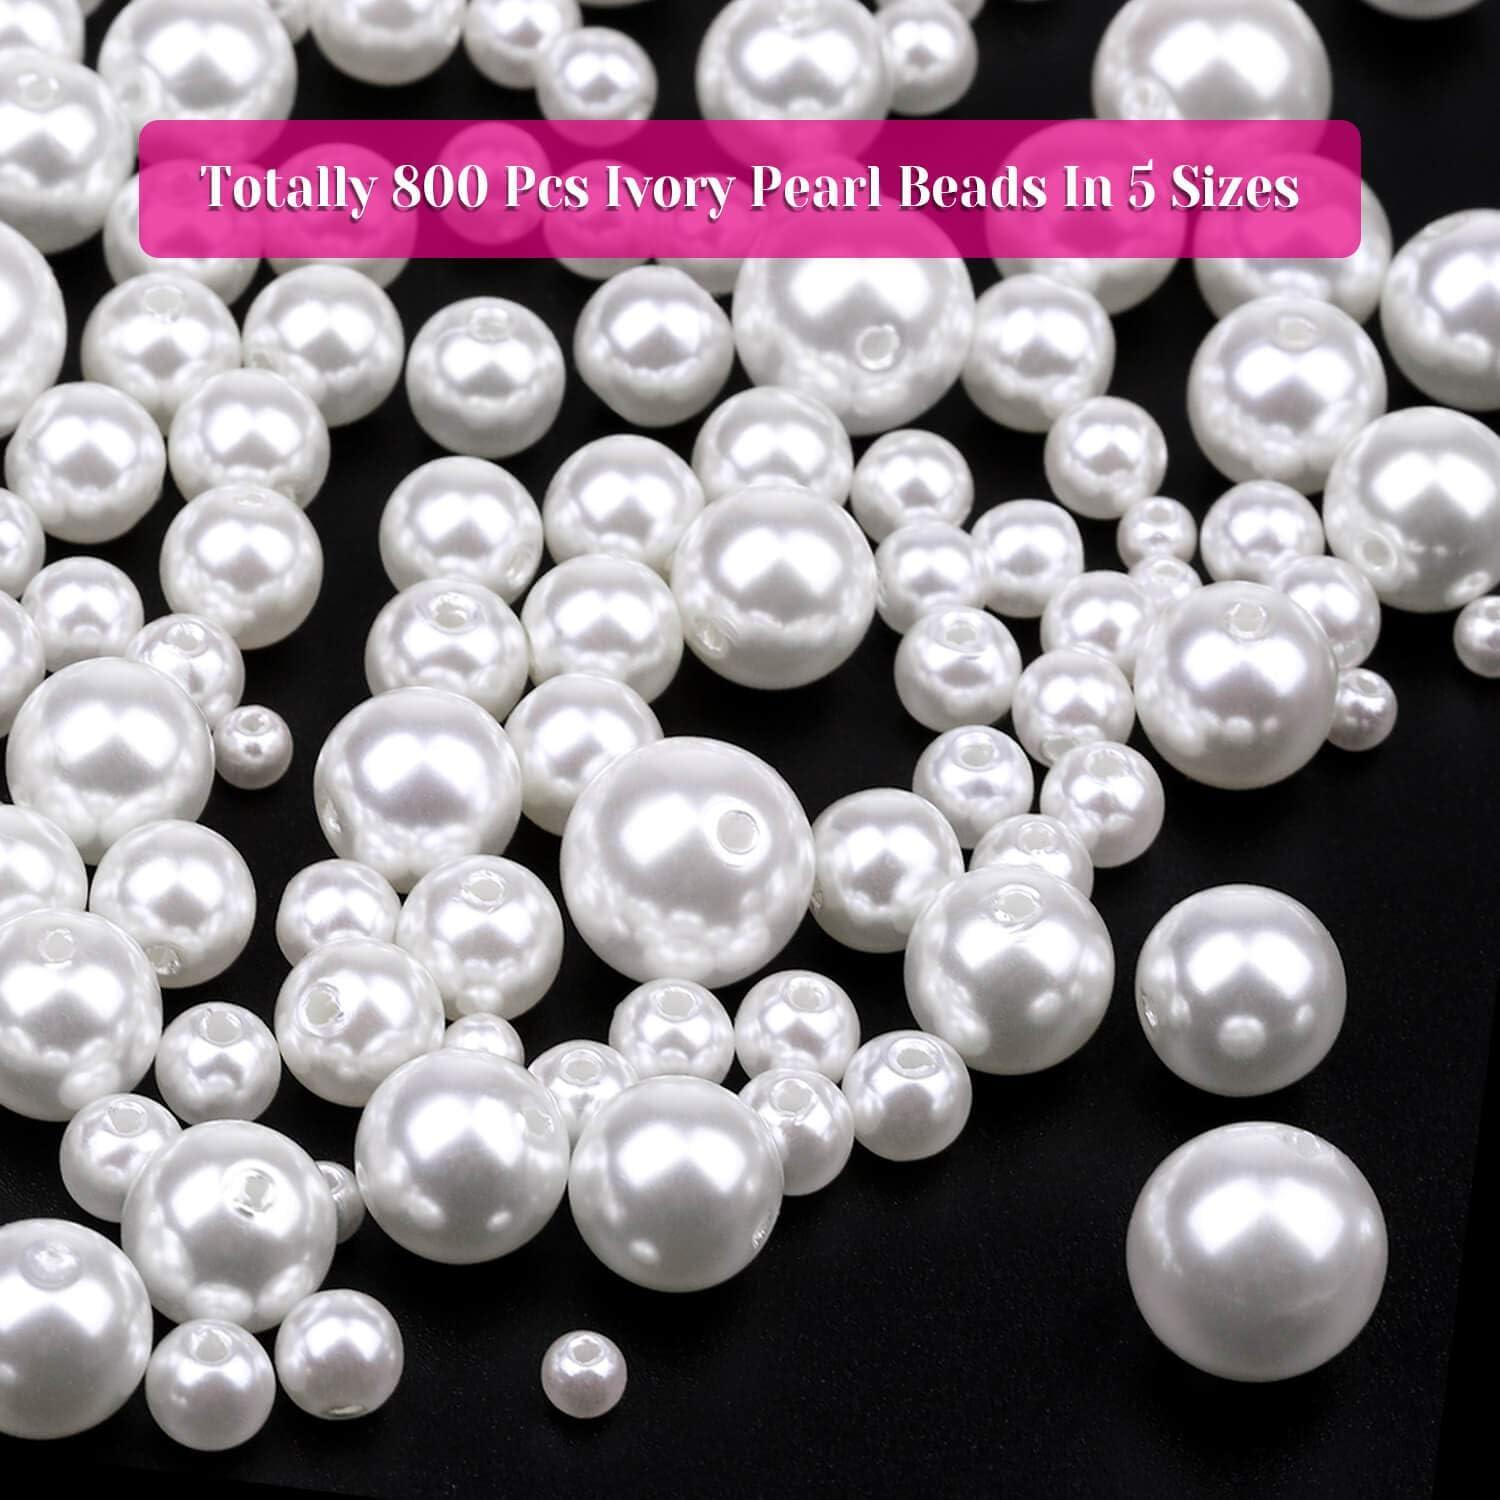 Ibeedow 800 Pcs Pearl Beads for Jewelry Making, Fake Pearls for Crafts  Jewelry Making, 3-14mm Ivory White Pearl Beads for Crafting Bracelets